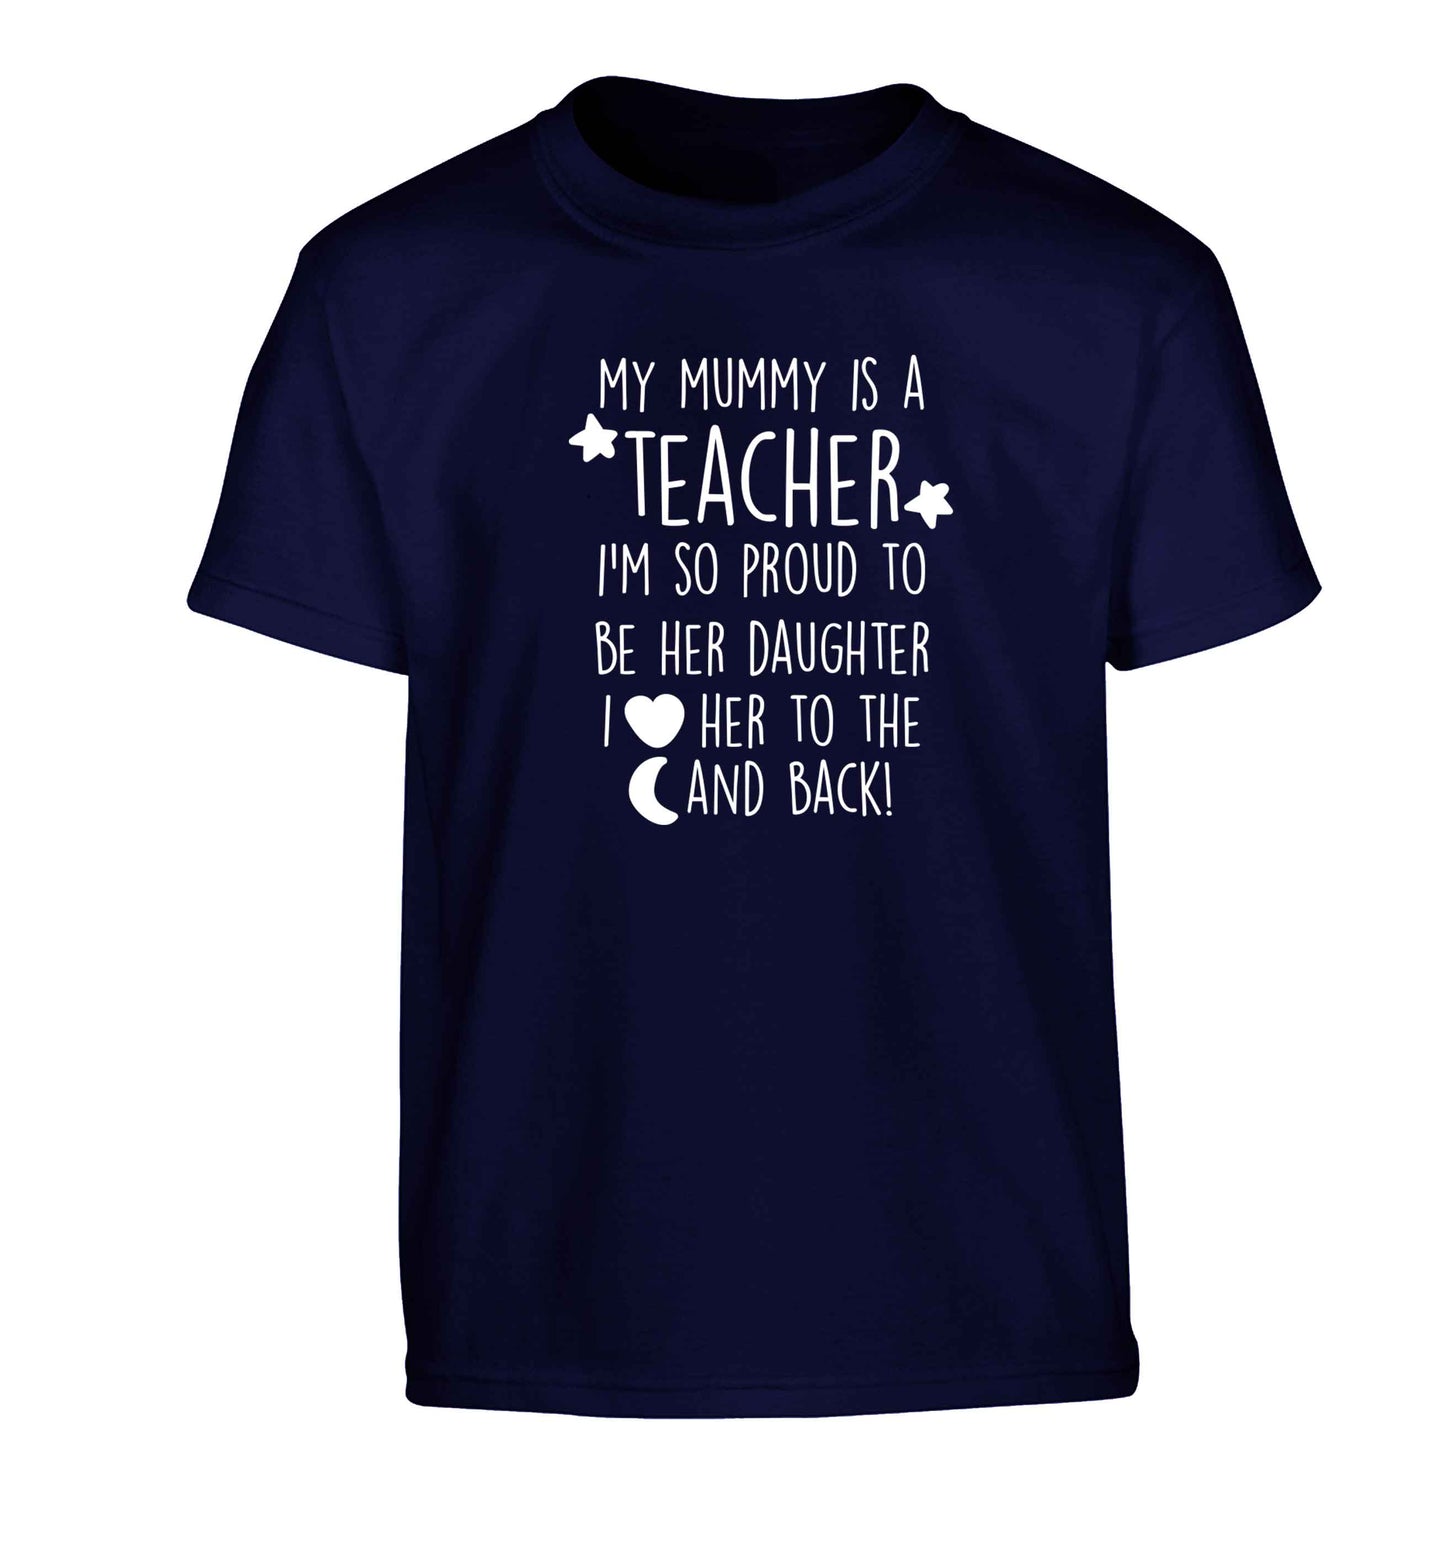 My mummy is a teacher I'm so proud to be her daughter I love her to the moon and back Children's navy Tshirt 12-13 Years